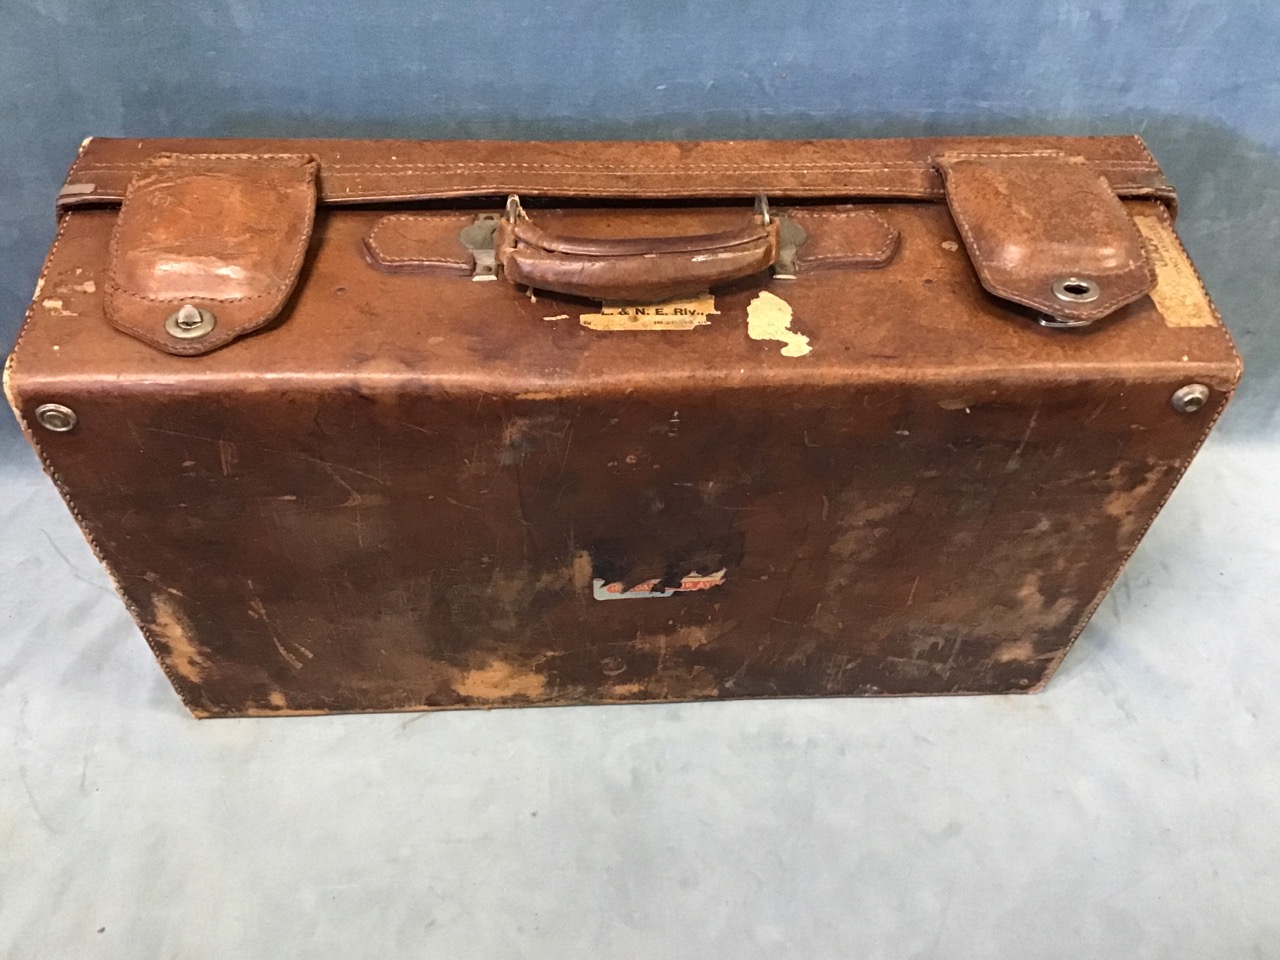 An early 20th century leather suitcase, by Dog Brand, Shanghai, with nickel fittings and leather - Image 3 of 3